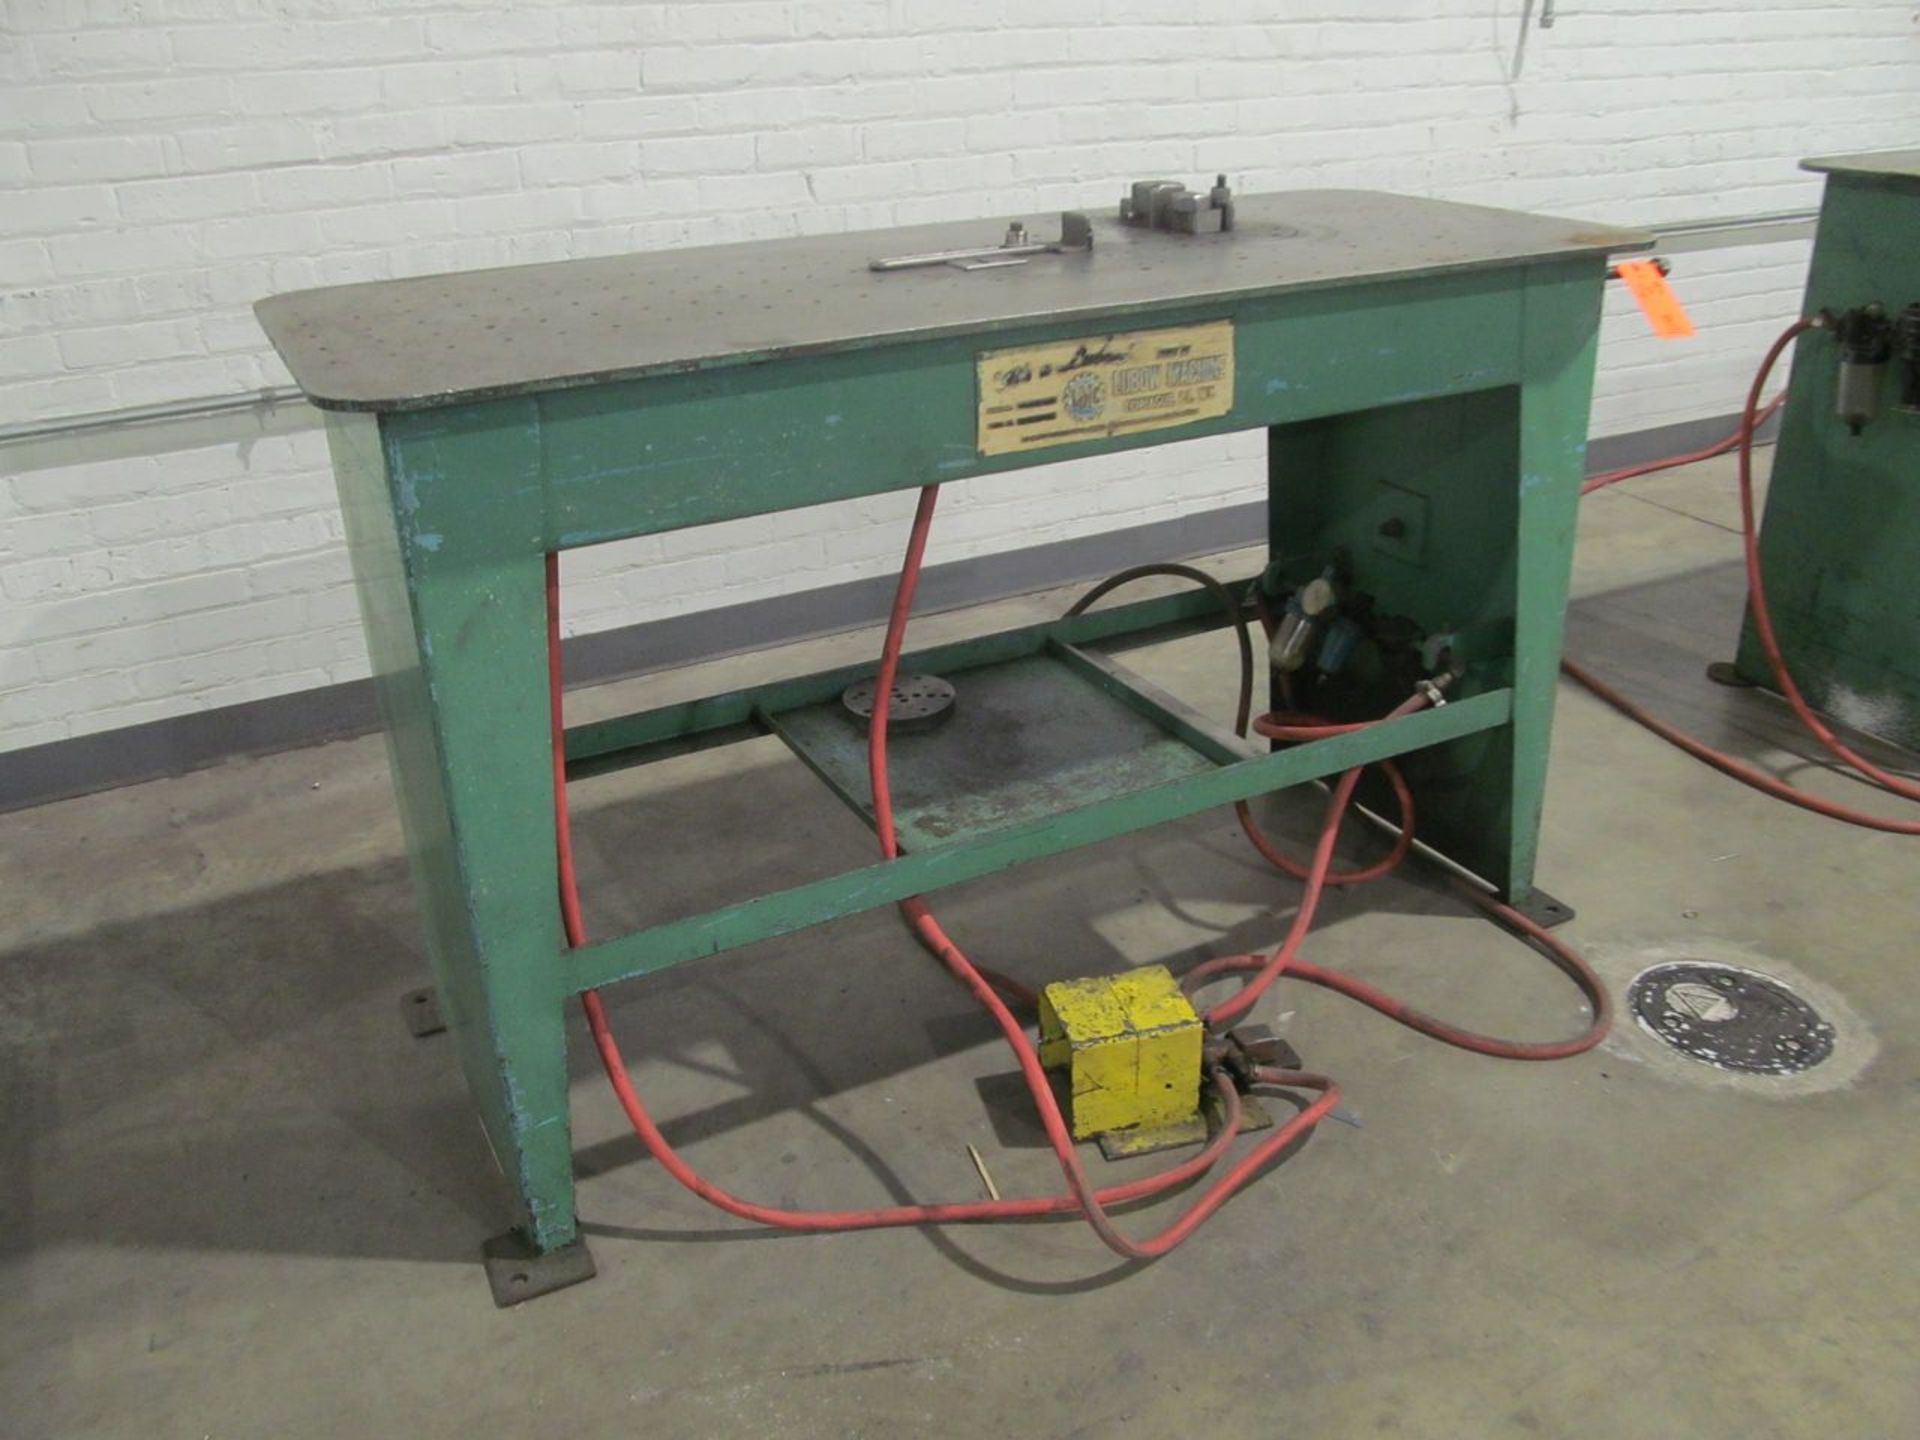 Lubow Machine Co. (LMC) Model ML-6 Wire Bender, S/N: 11-72; 60 in. x 24 in. Table, 10 in. Rotating